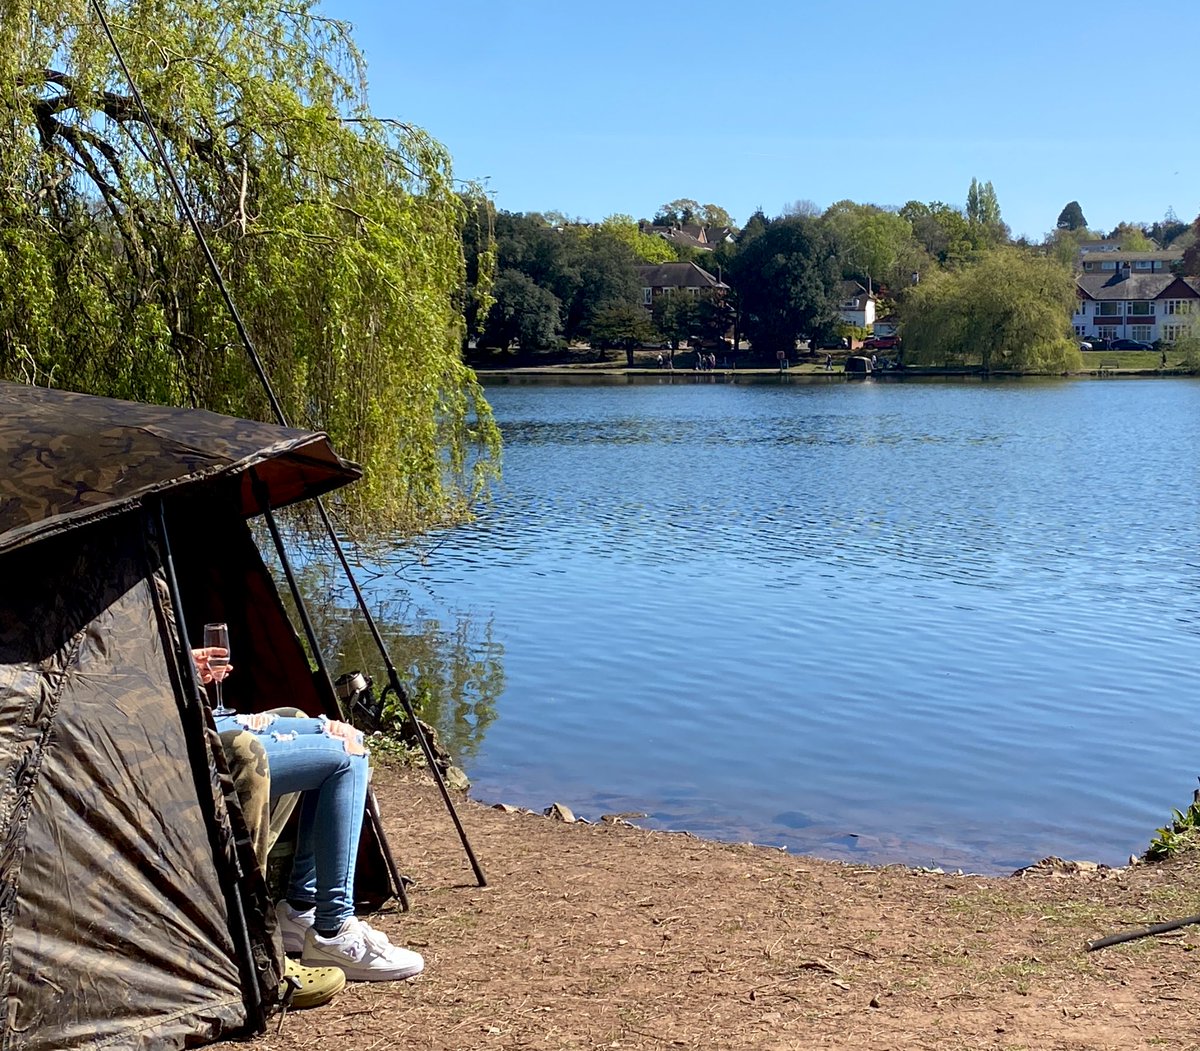 Prosecco in the park: gone fishin’, Roath Park style. 🎣🥂☀️🕶️ #cardiff